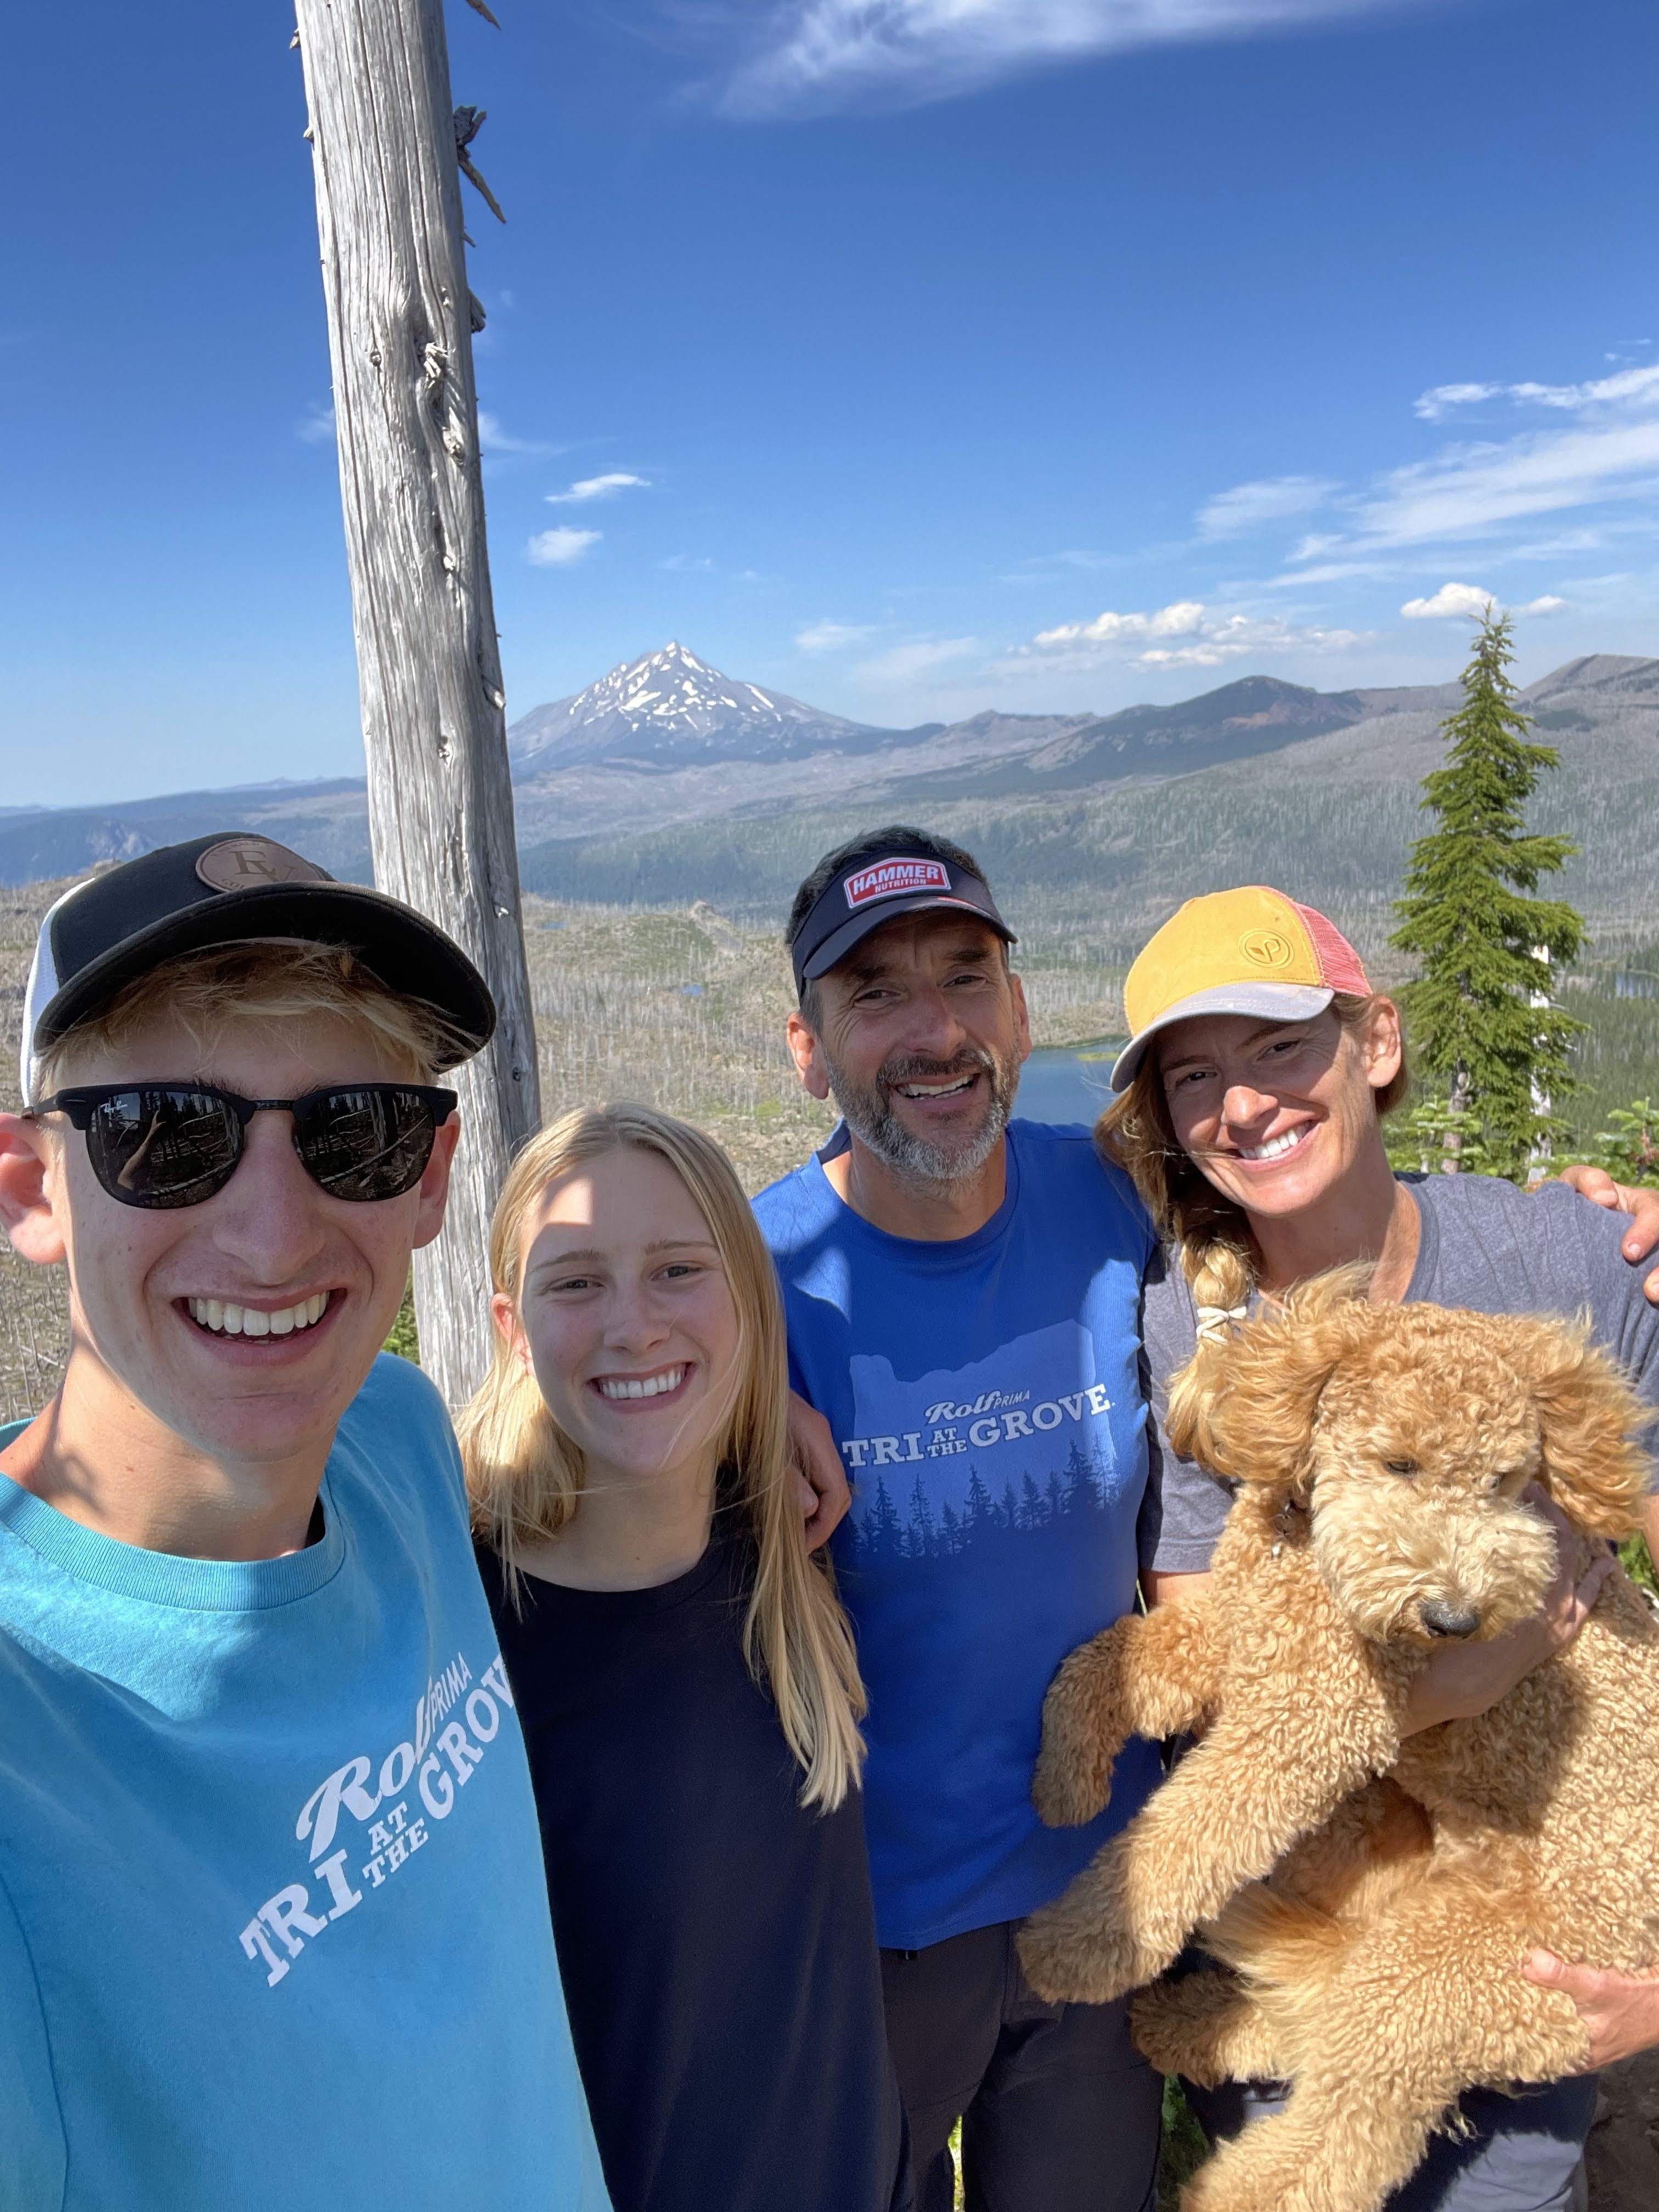 Image of Brad with his family on a trip to Mt. Jefferson with the family dog, Molly.